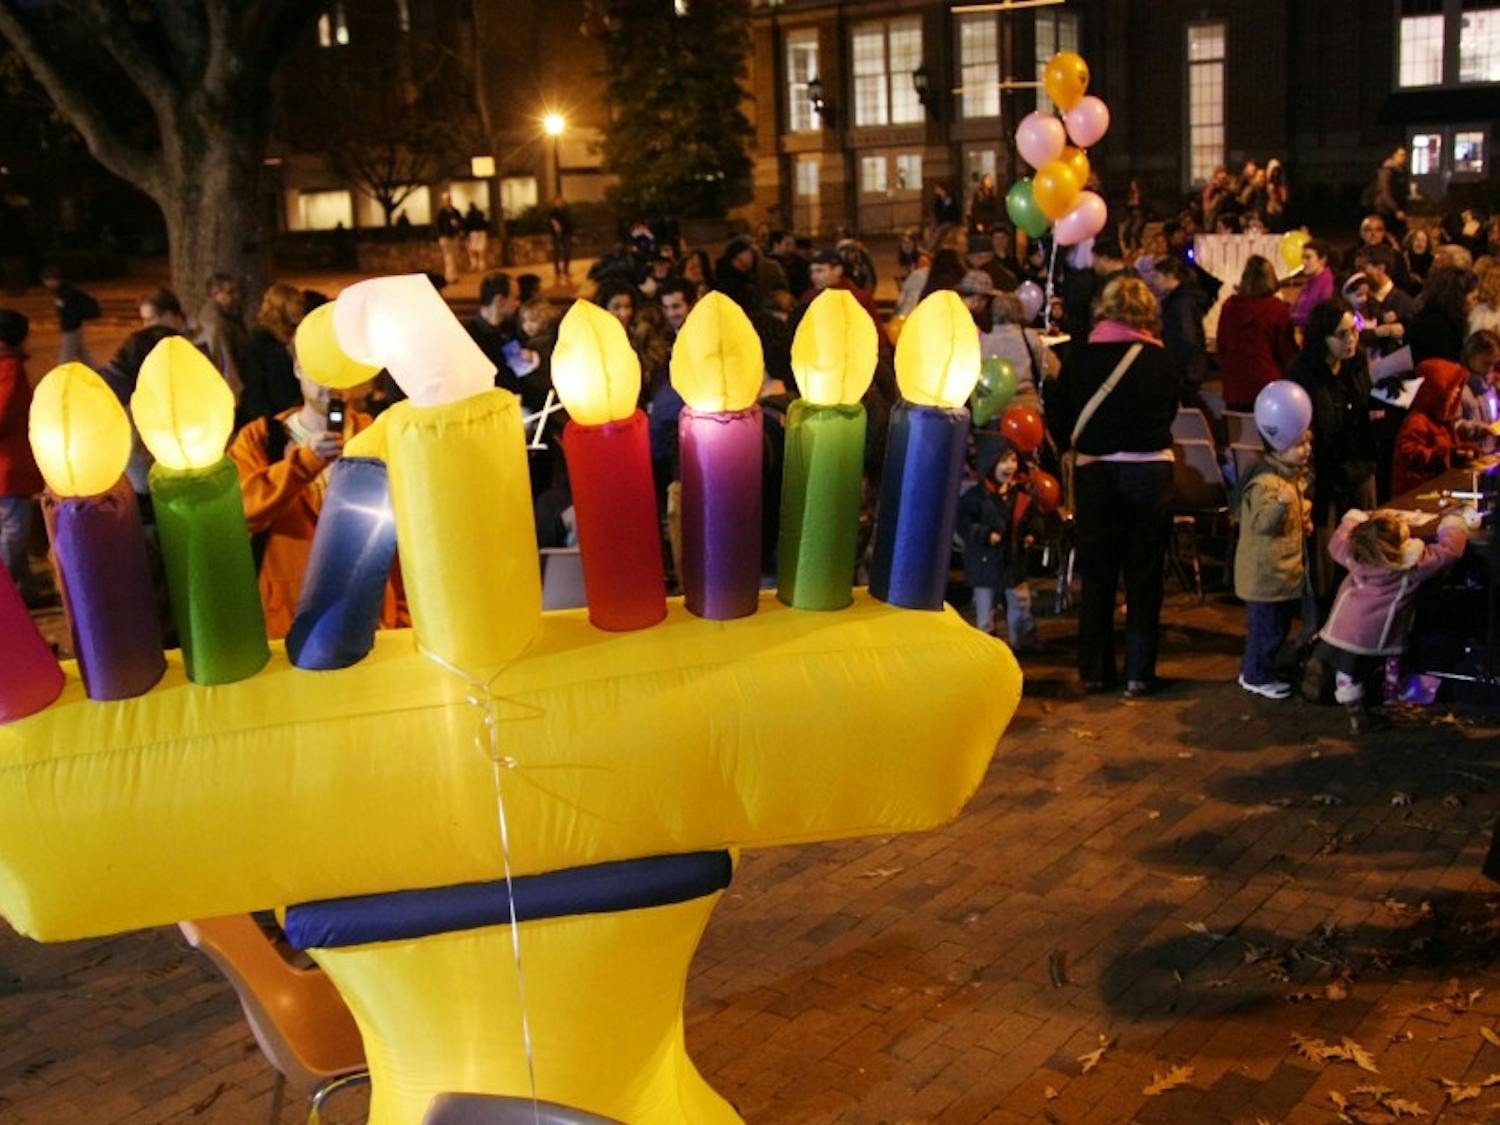 	A giant inflatable menorah decorates the Pit/ 